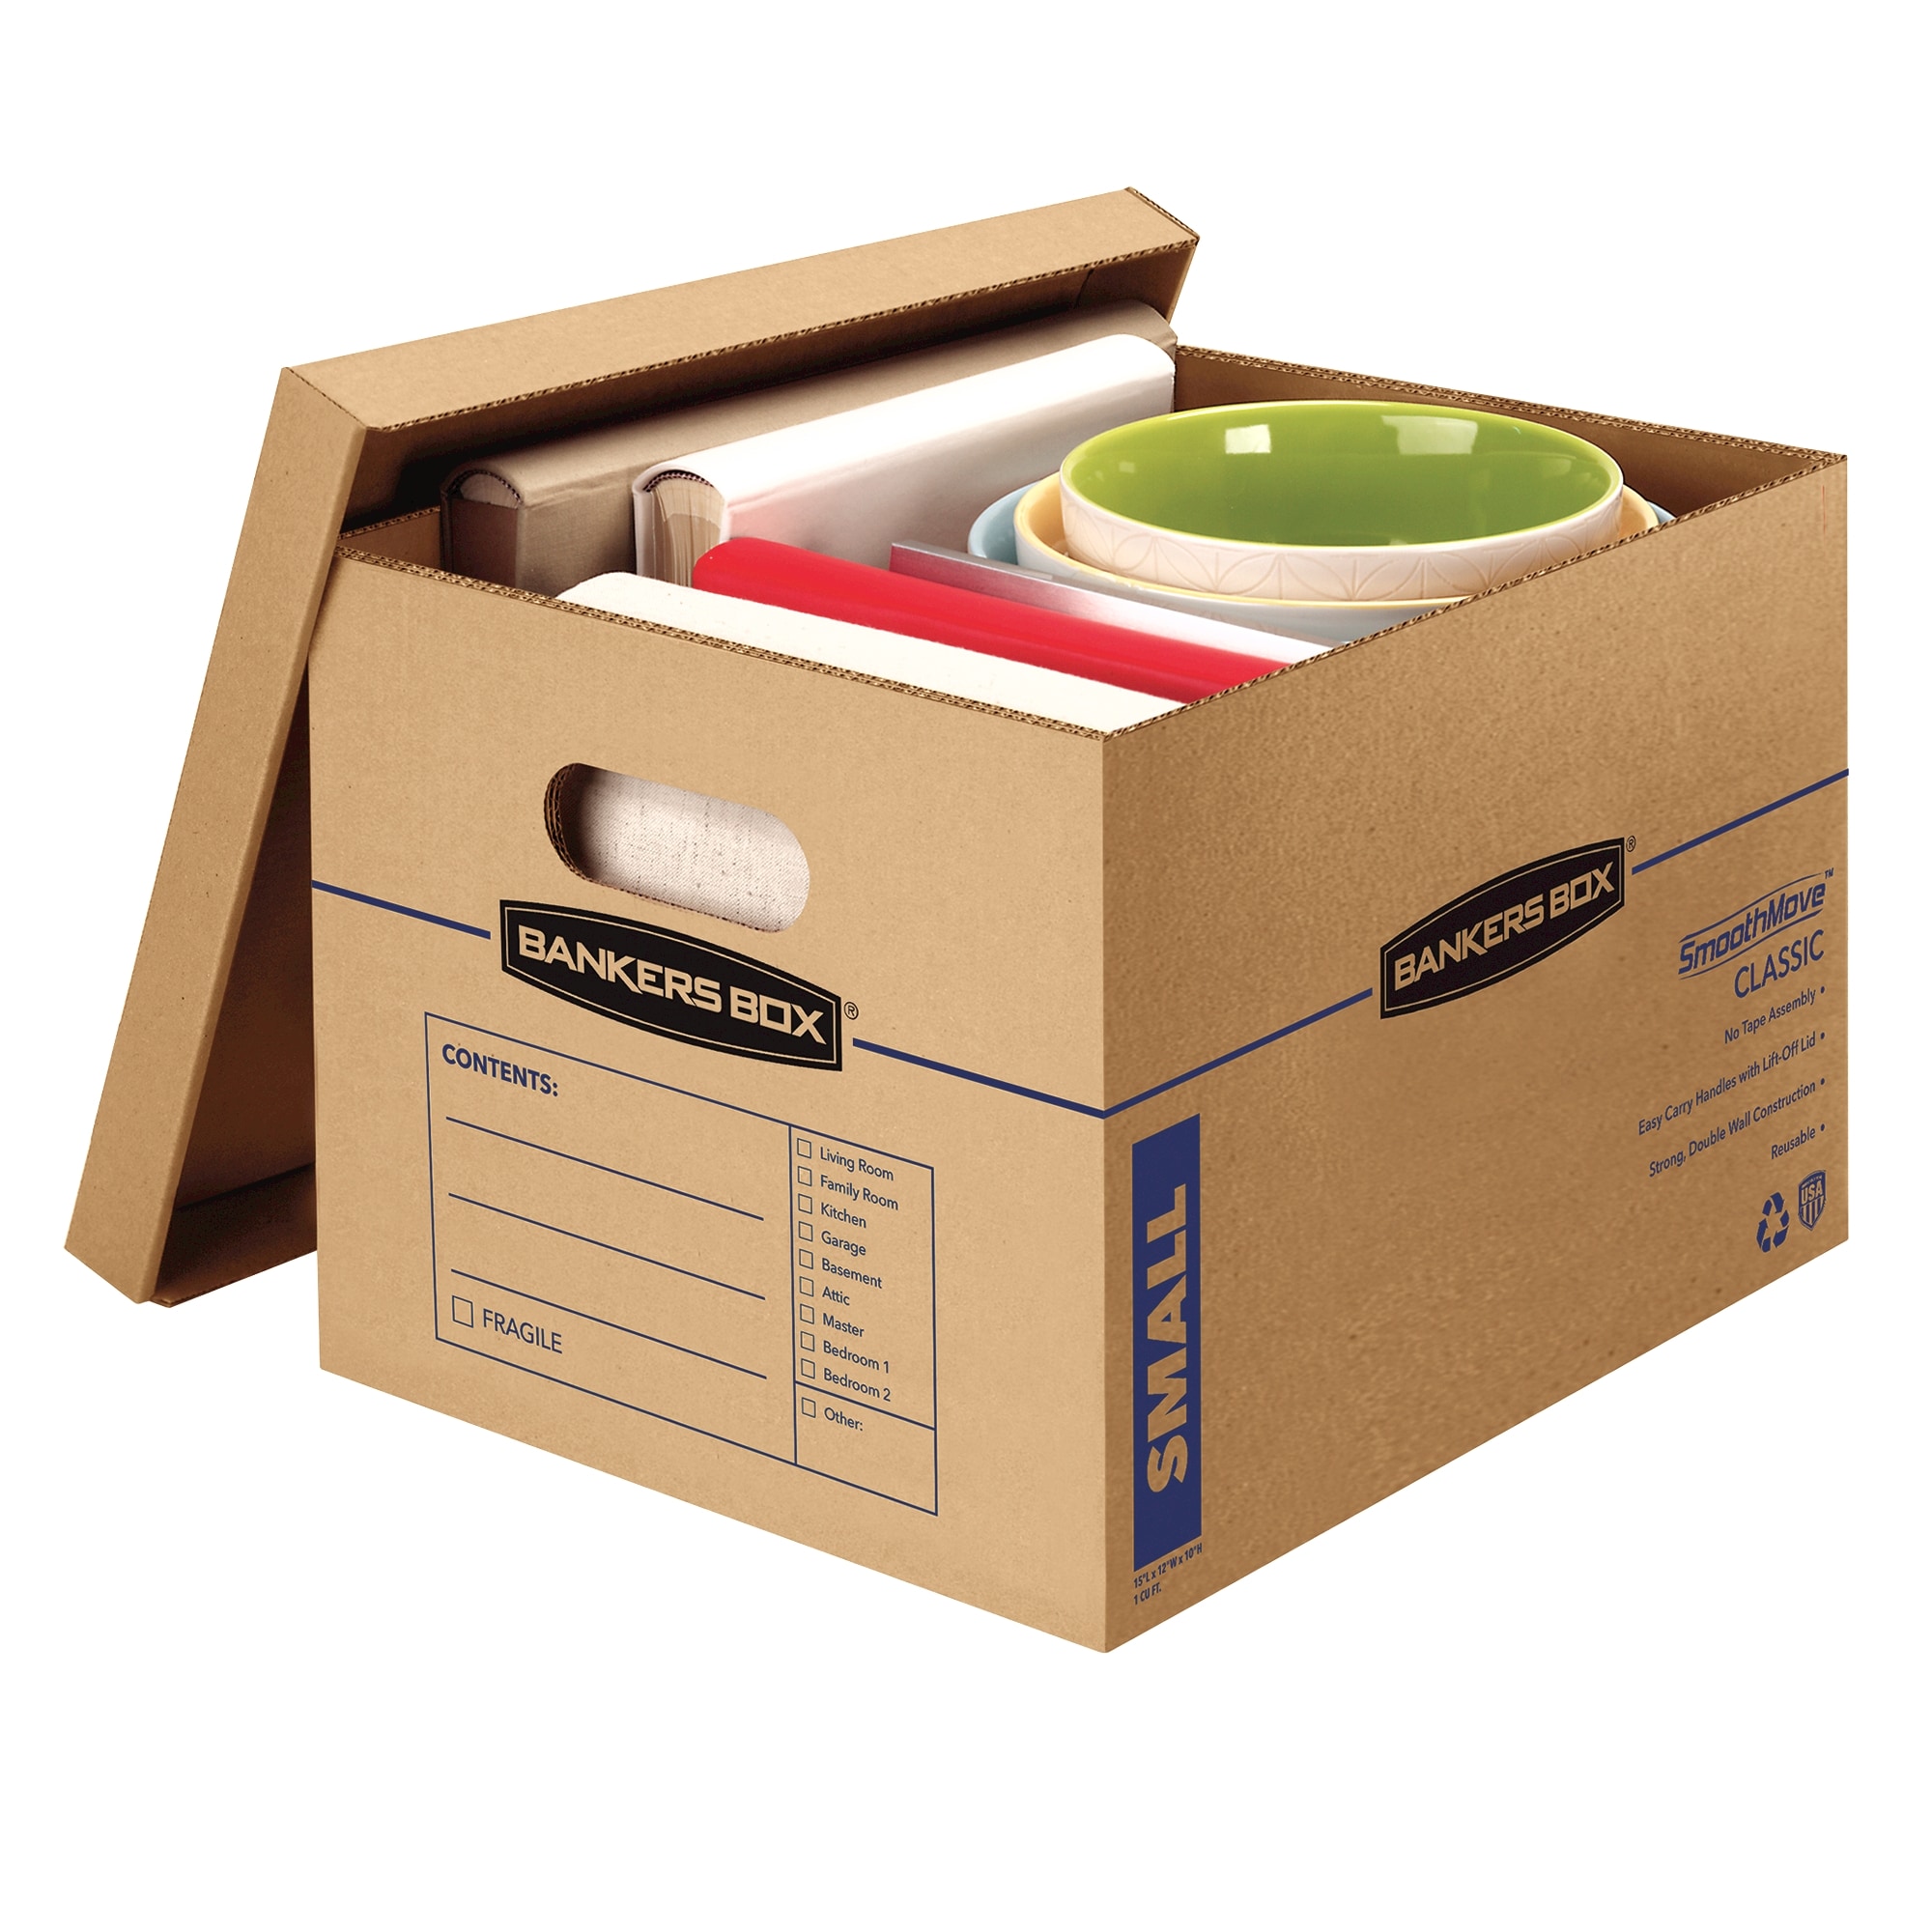 Officemax 100% Recycled Archive Box 262H x 320W x 415Dmm Carton 20